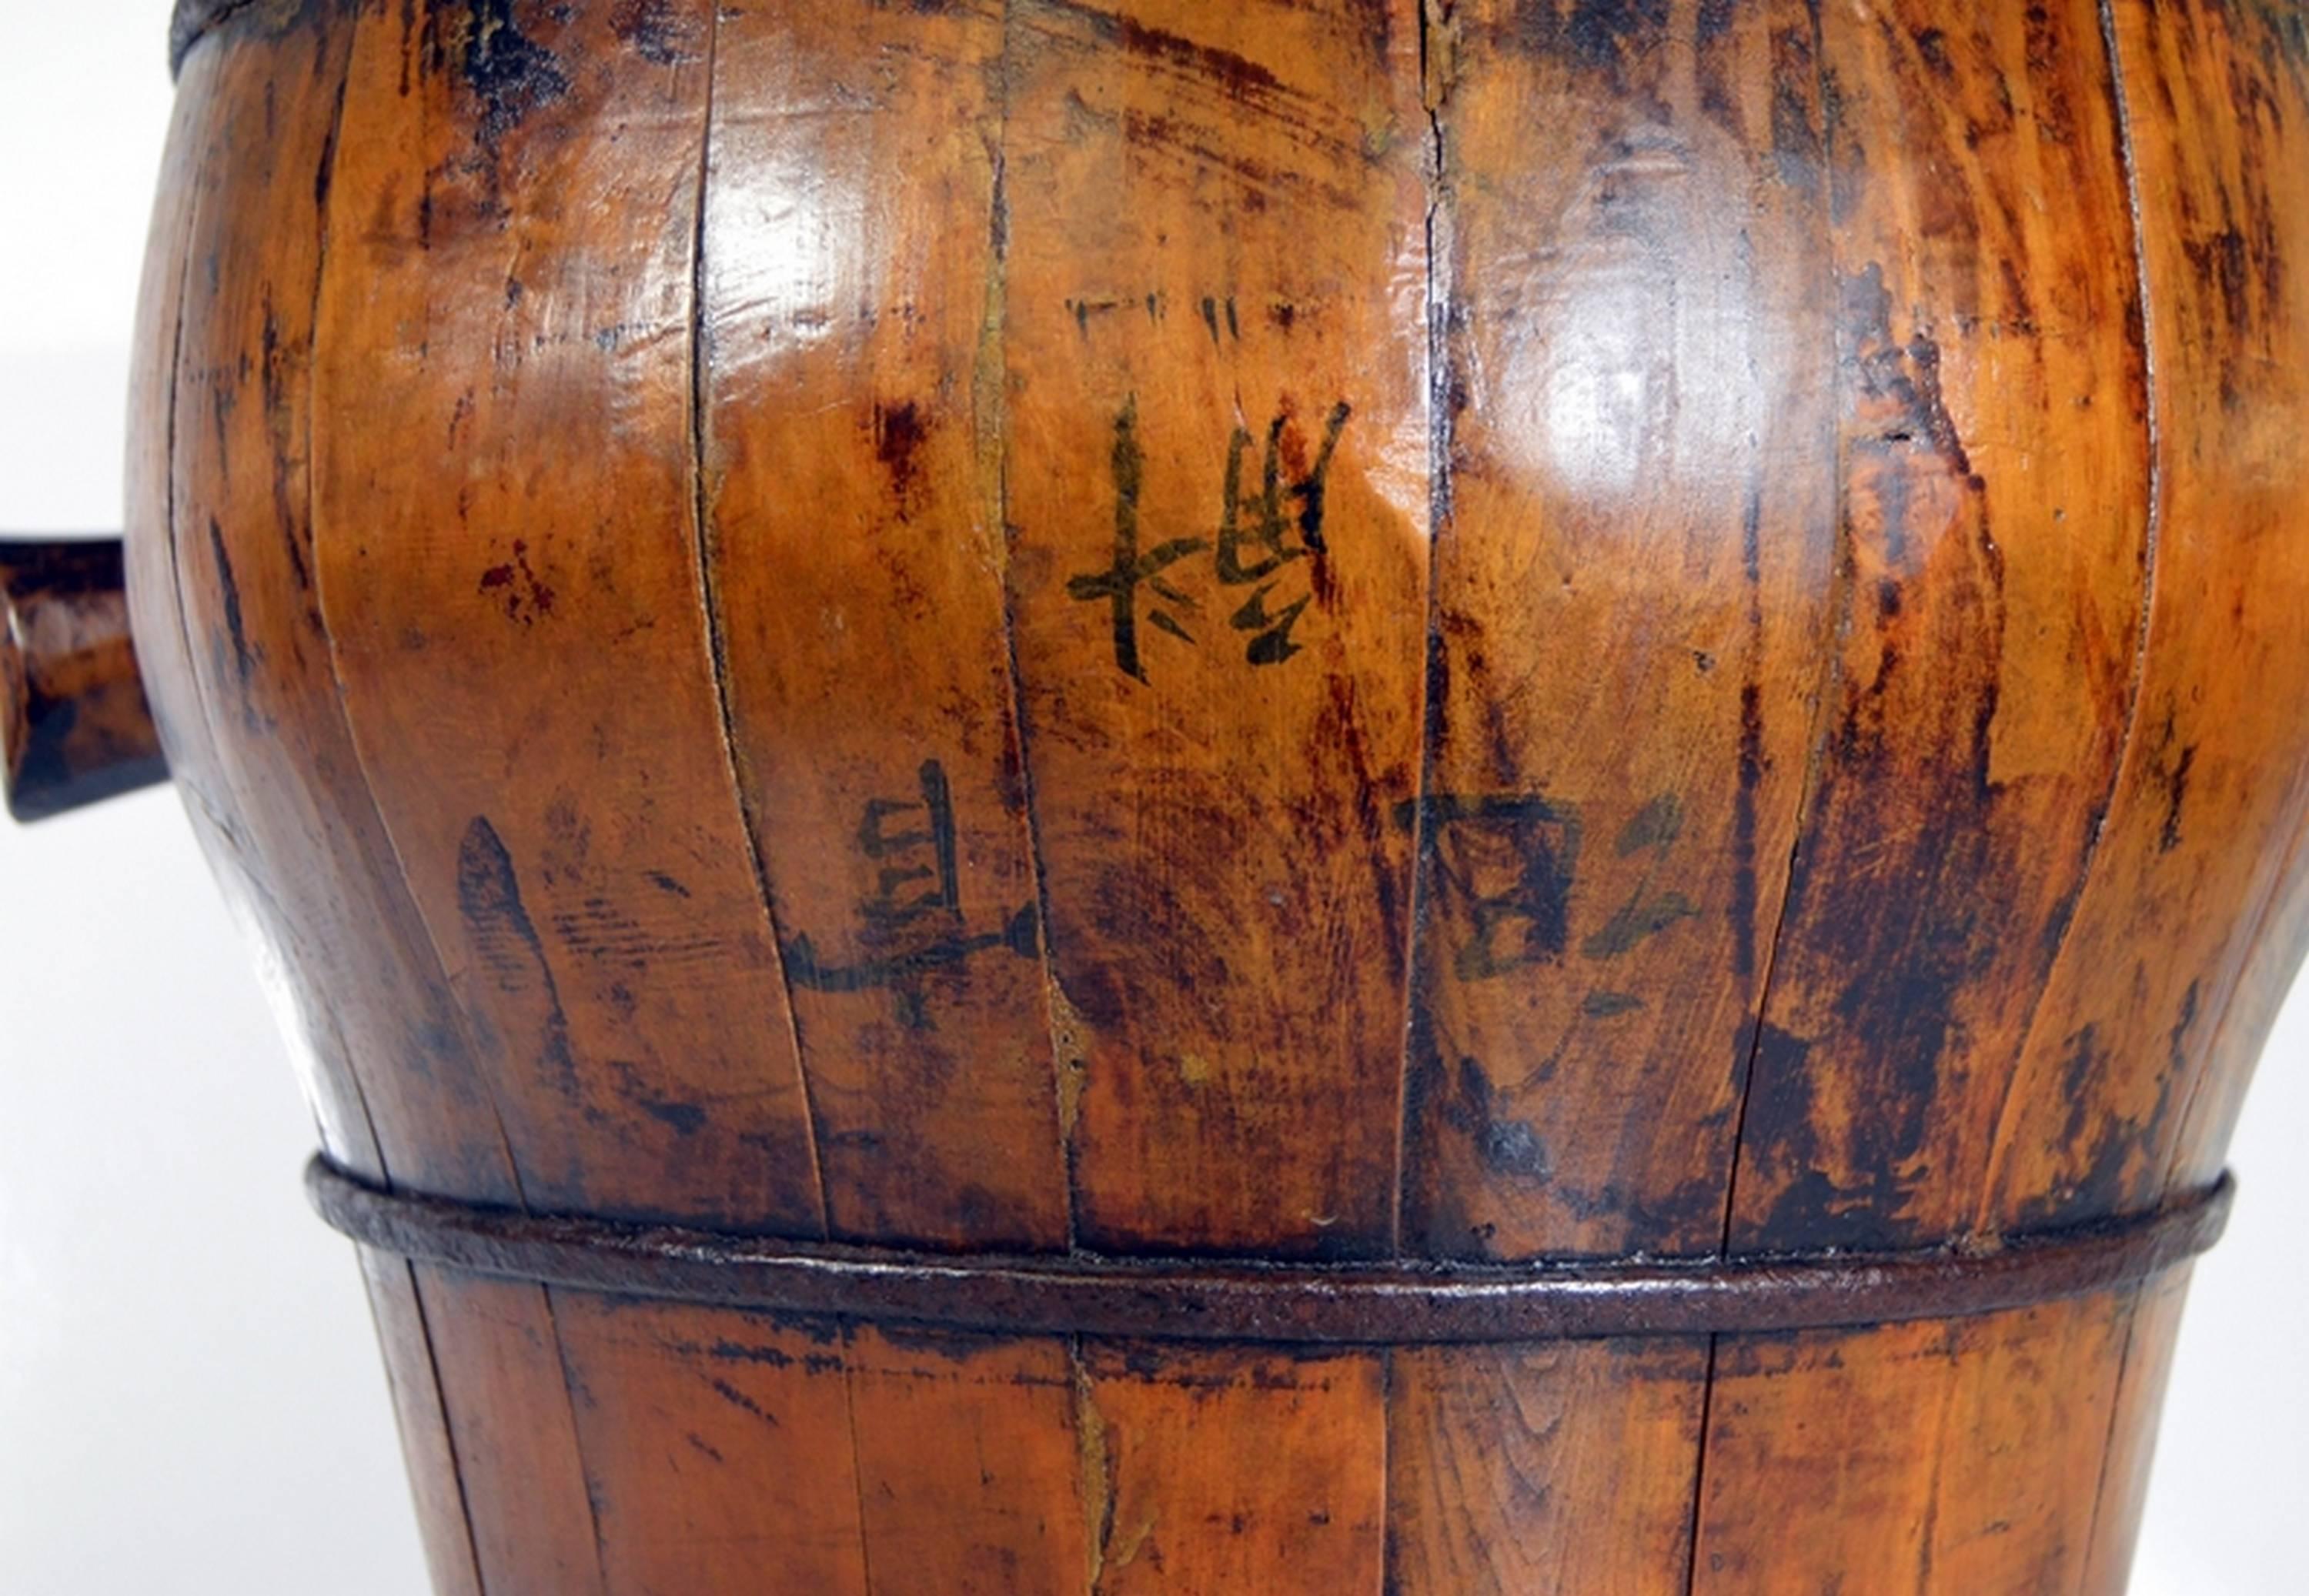 Wood Antique Handmade Drum-Shaped Varnished Grain Basket from 19th Century, China